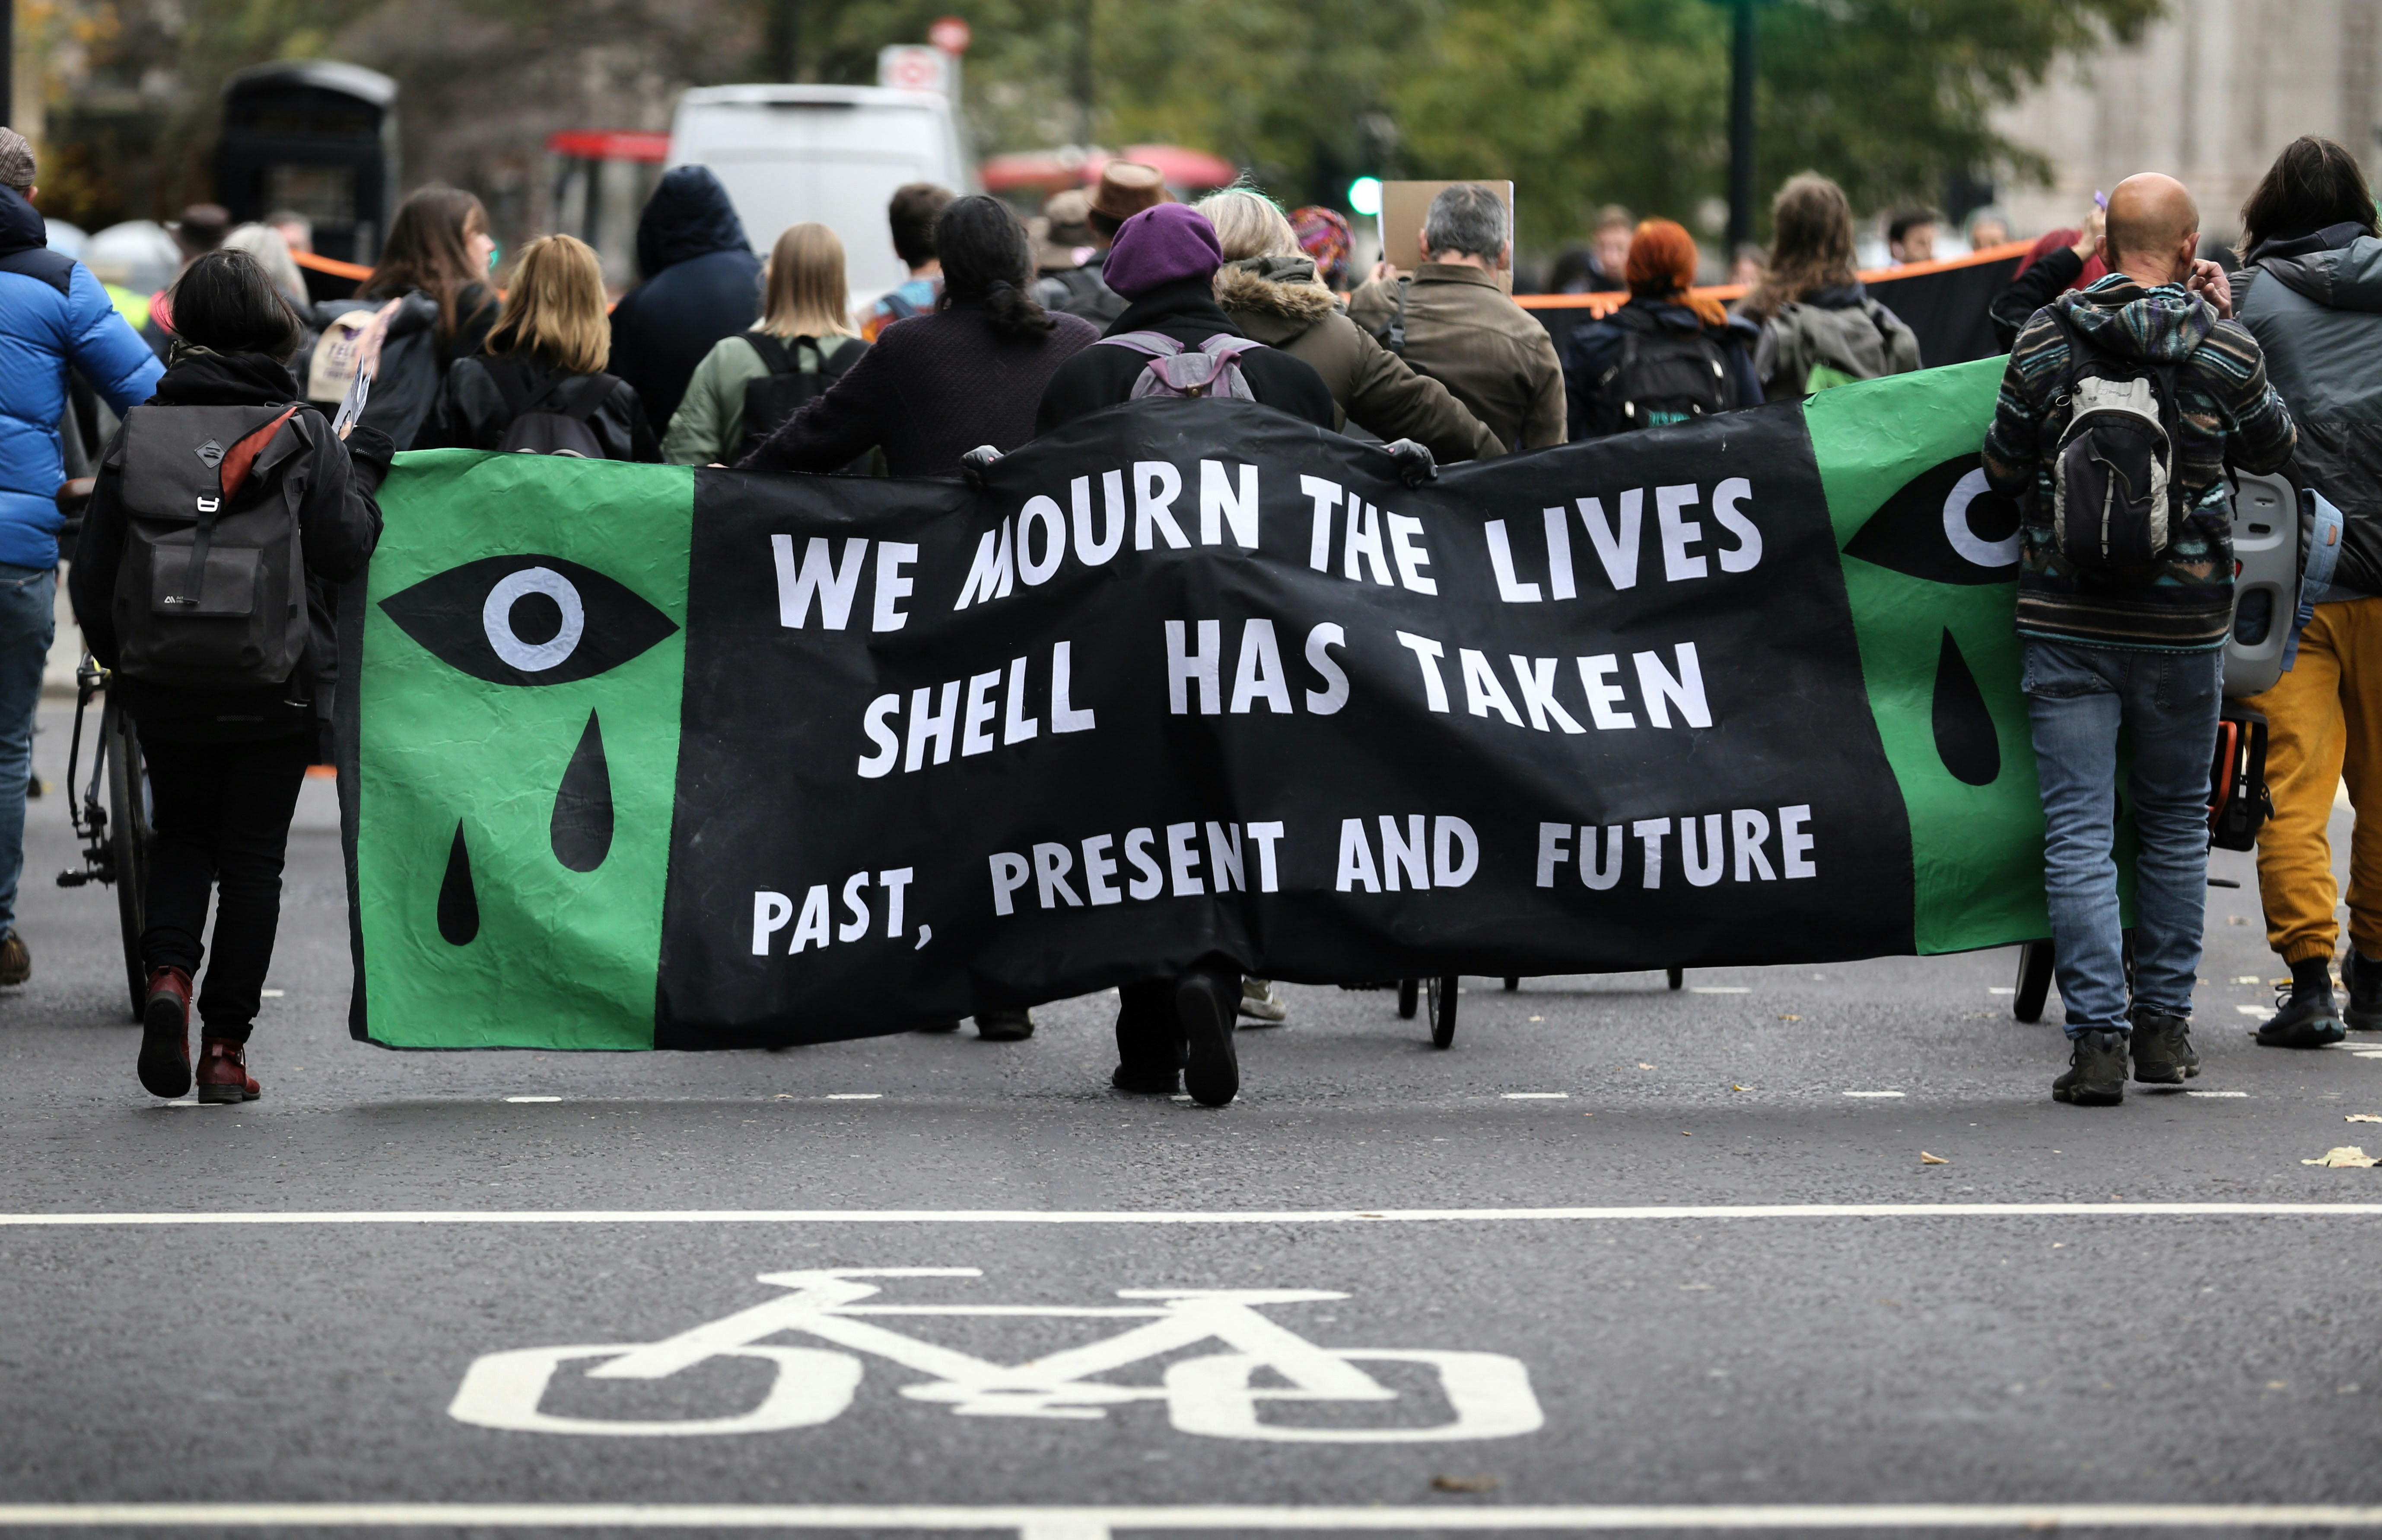 LONDON, ENGLAND - NOVEMBER 10: Protesters assemble behind an anti-Shell banner as they march through the City of London on November 10, 2022 in London, England. It is the 27th anniversary of the Ogoni 9, including Ken Saro-Wiwa, being executed in Nigeria for opposing Shell and their fossil fuel business in the Niger delta. Extinction Rebellion are putting Vanguard on trial as protesters believe their investing in fossil fuel companies is unethical. (Photo by Martin Pope/Getty Images)